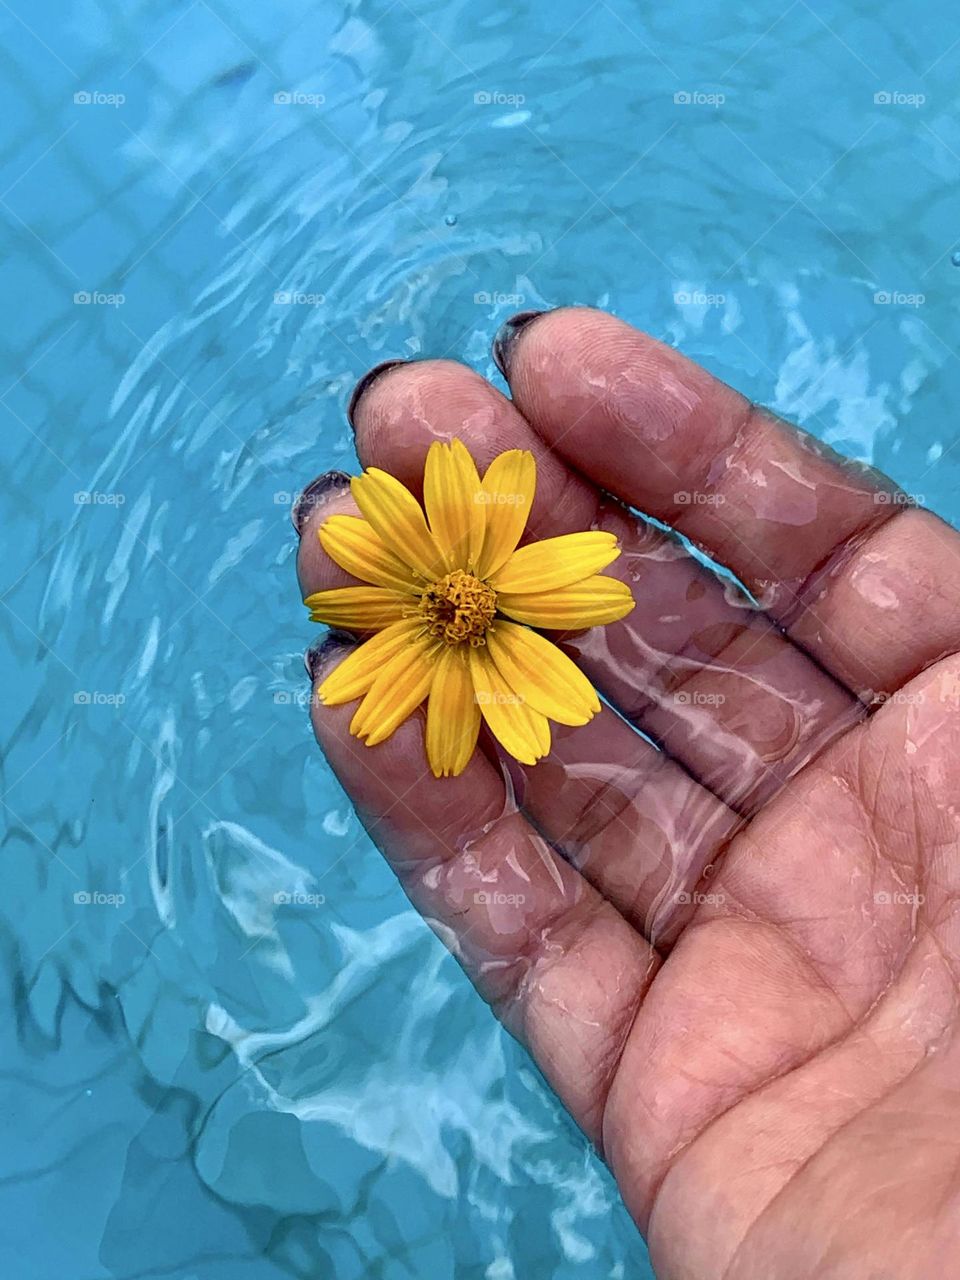 Hand holding a yellow flower inside the pool